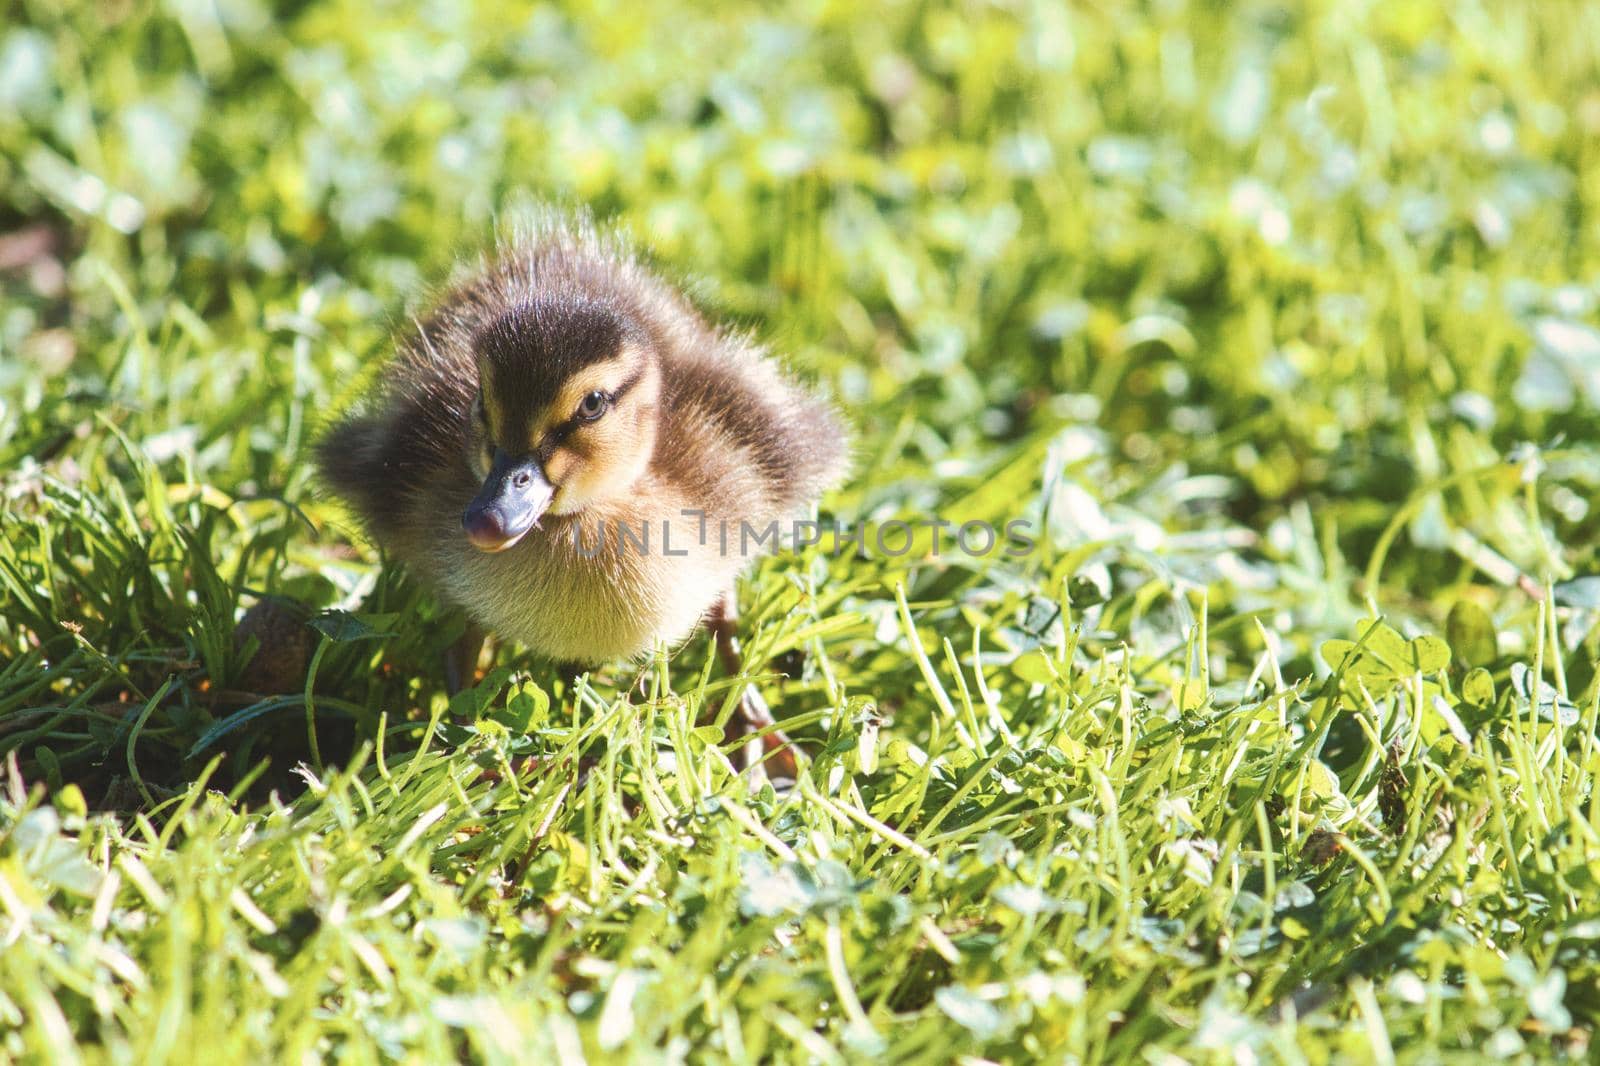 Cute little baby duckling waddling on the green grass by tennesseewitney